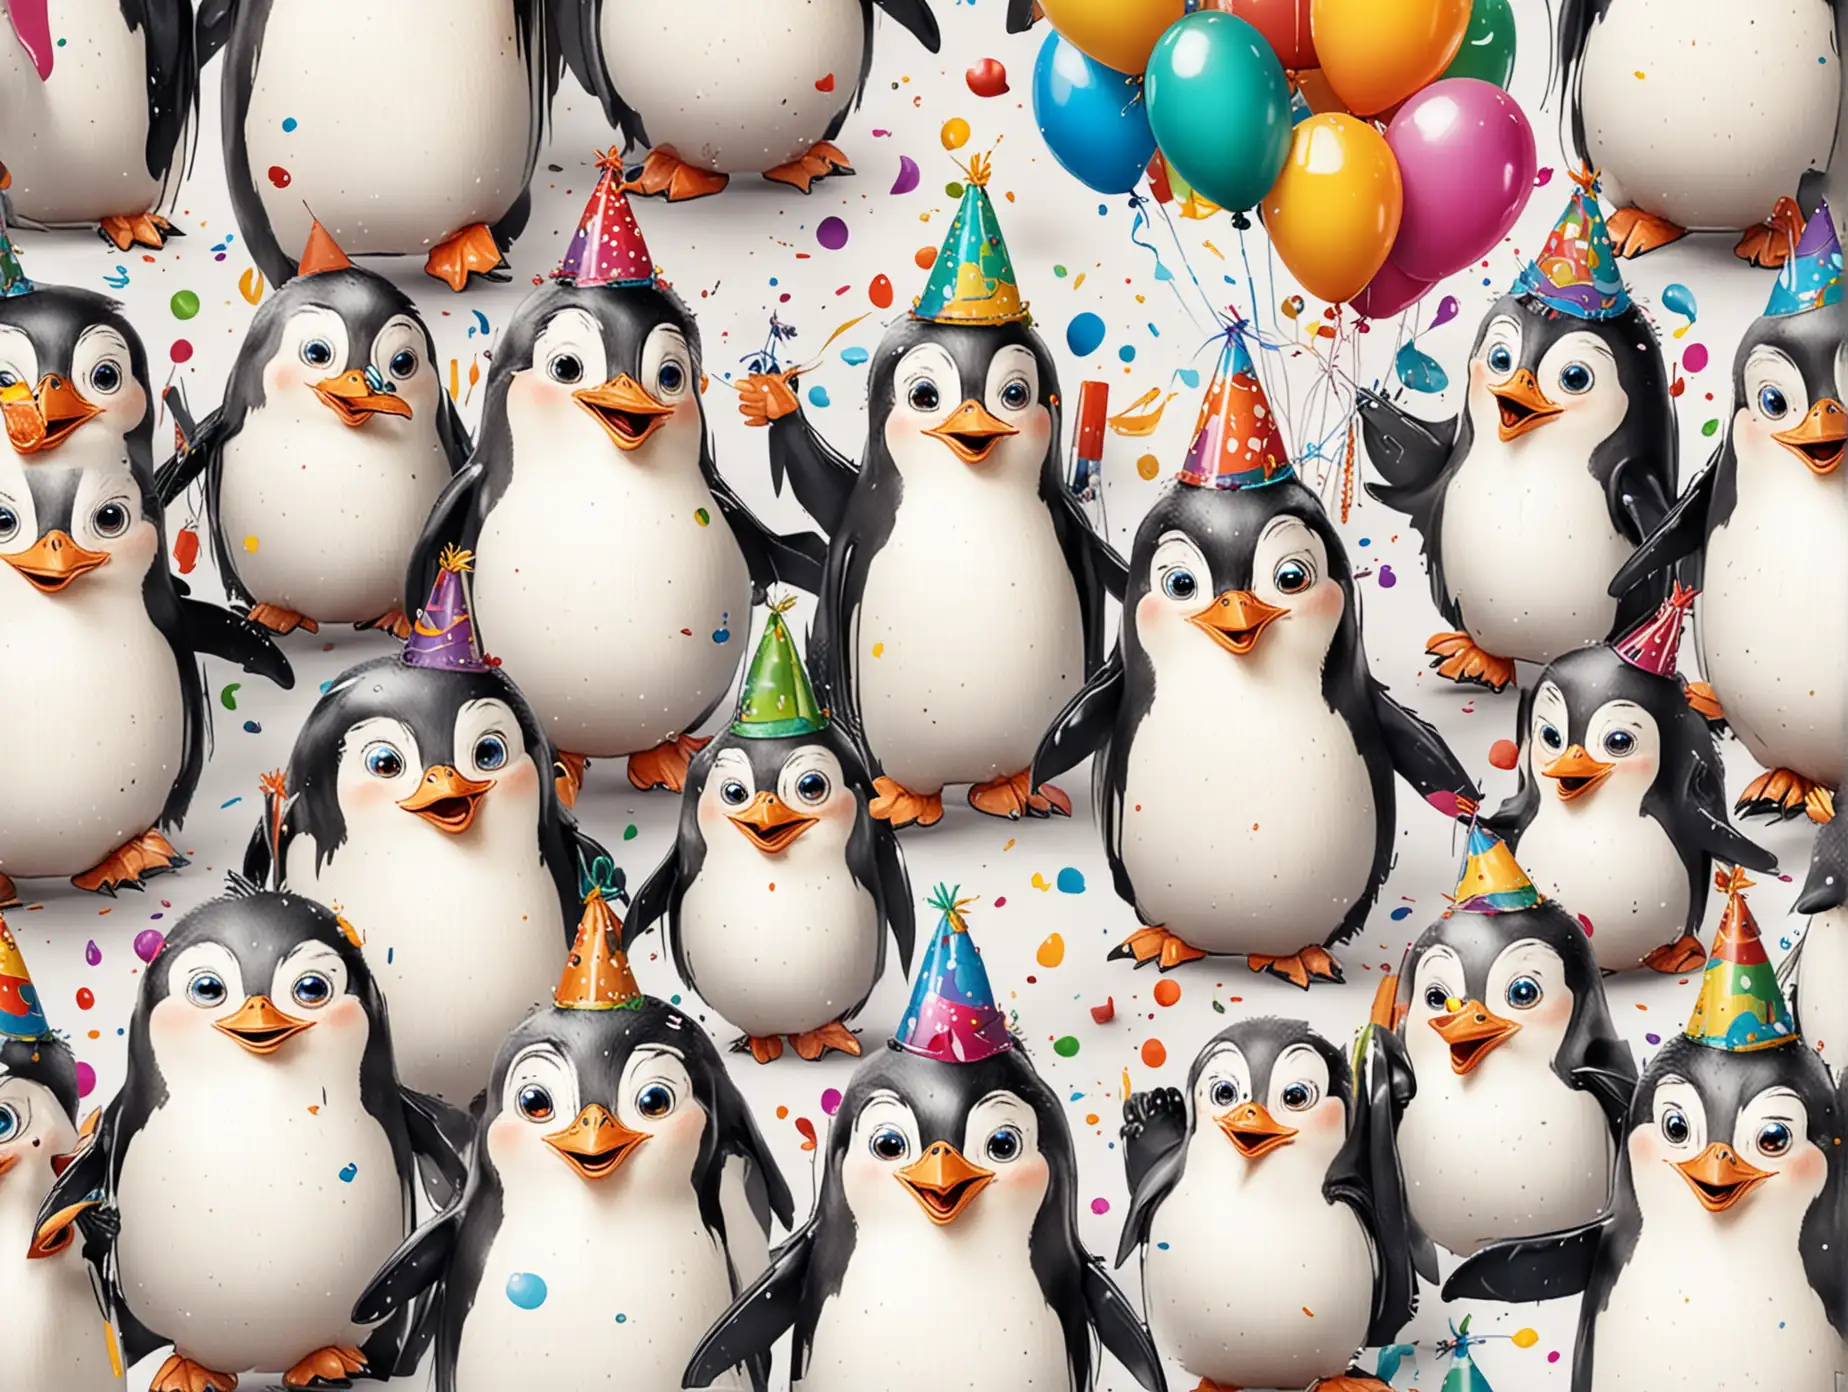 multicolour happy penguins cartoon design at a birthday party, pure white background